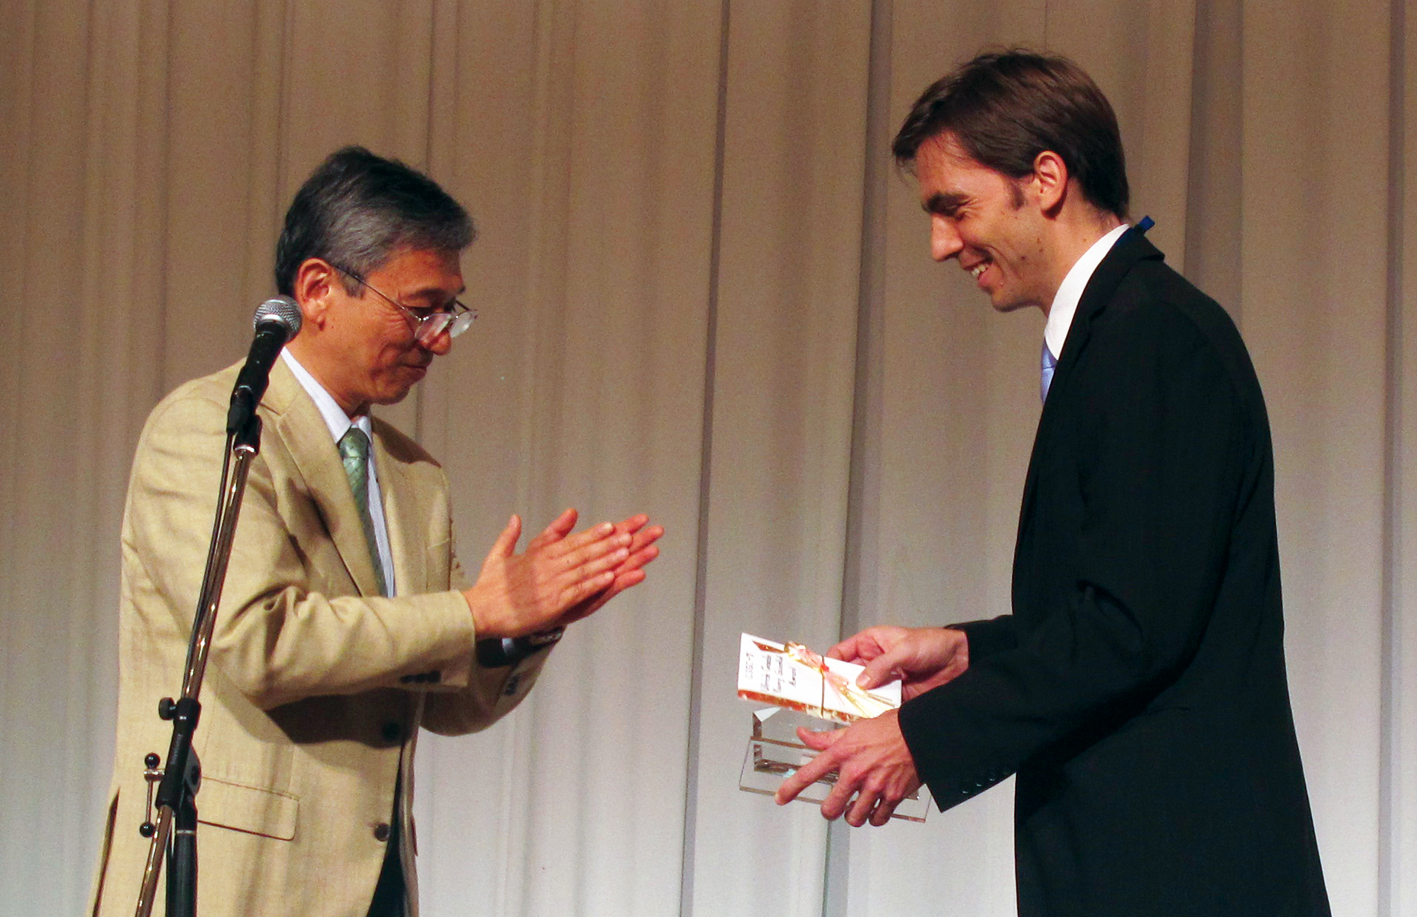 Dr. Martin Schubert of Fraunhofer ISE receives the Ulrich Gösele Young Scientist Award 2013 from the Prof. Koichi Kakimoto at the International Conference of Crystalline Silicon for Solar Cells (CSSC-7) in Fukuoka, Japan.